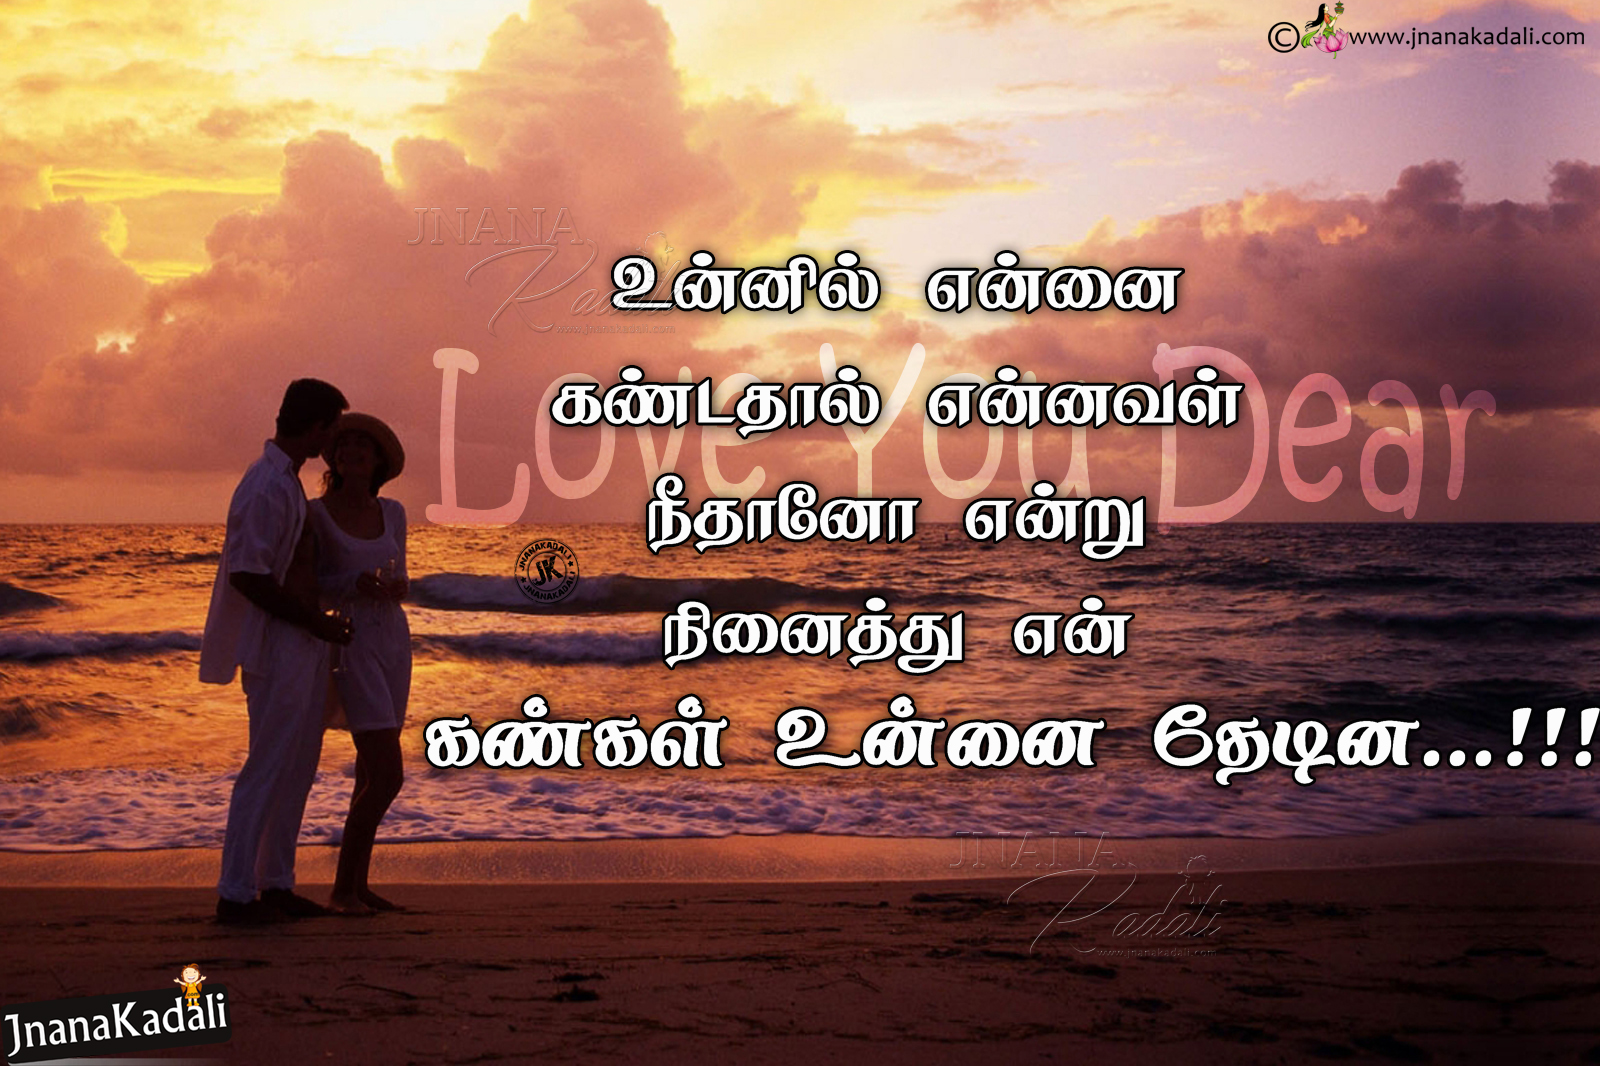 Heart Touching Love quotes in tamil Language with Images | JNANA KADALI